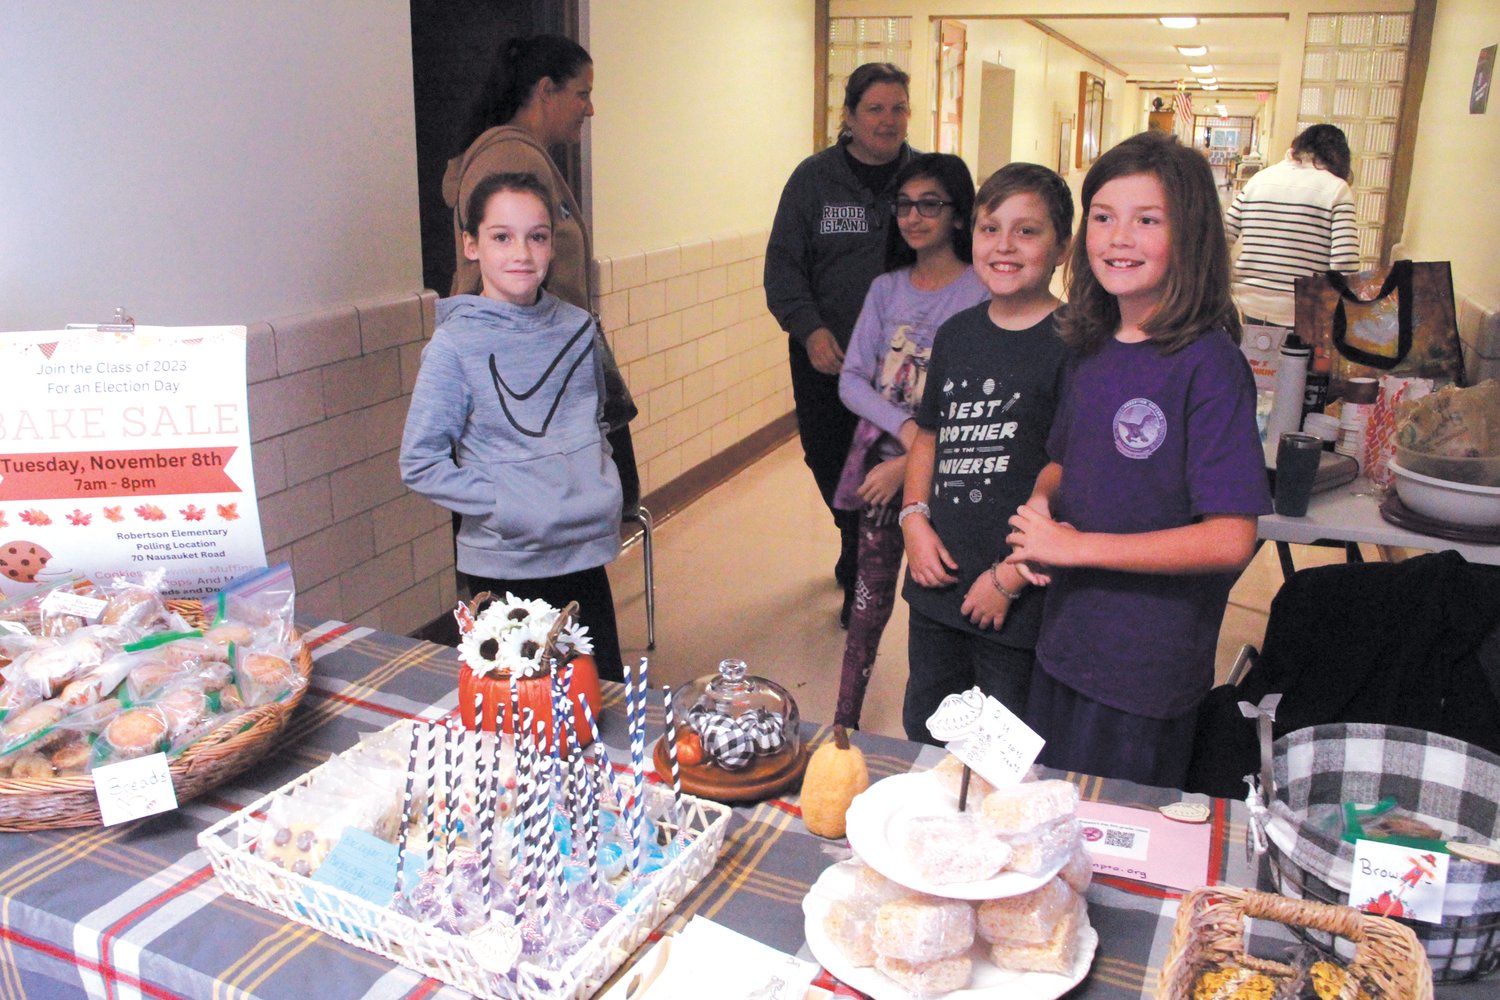 JUST WANT VOTERS WANTED: Robertson School fifth graders with the aid of their mothers set up a table of baked goods and candy in the corridor leading to the poll. Items sold for one dollar with the money going to the class for protects they are planning. Seen here from left are Adelynn Yates, Olyvia Giles, Patrick Sweeney and Tyler Parkhurst.